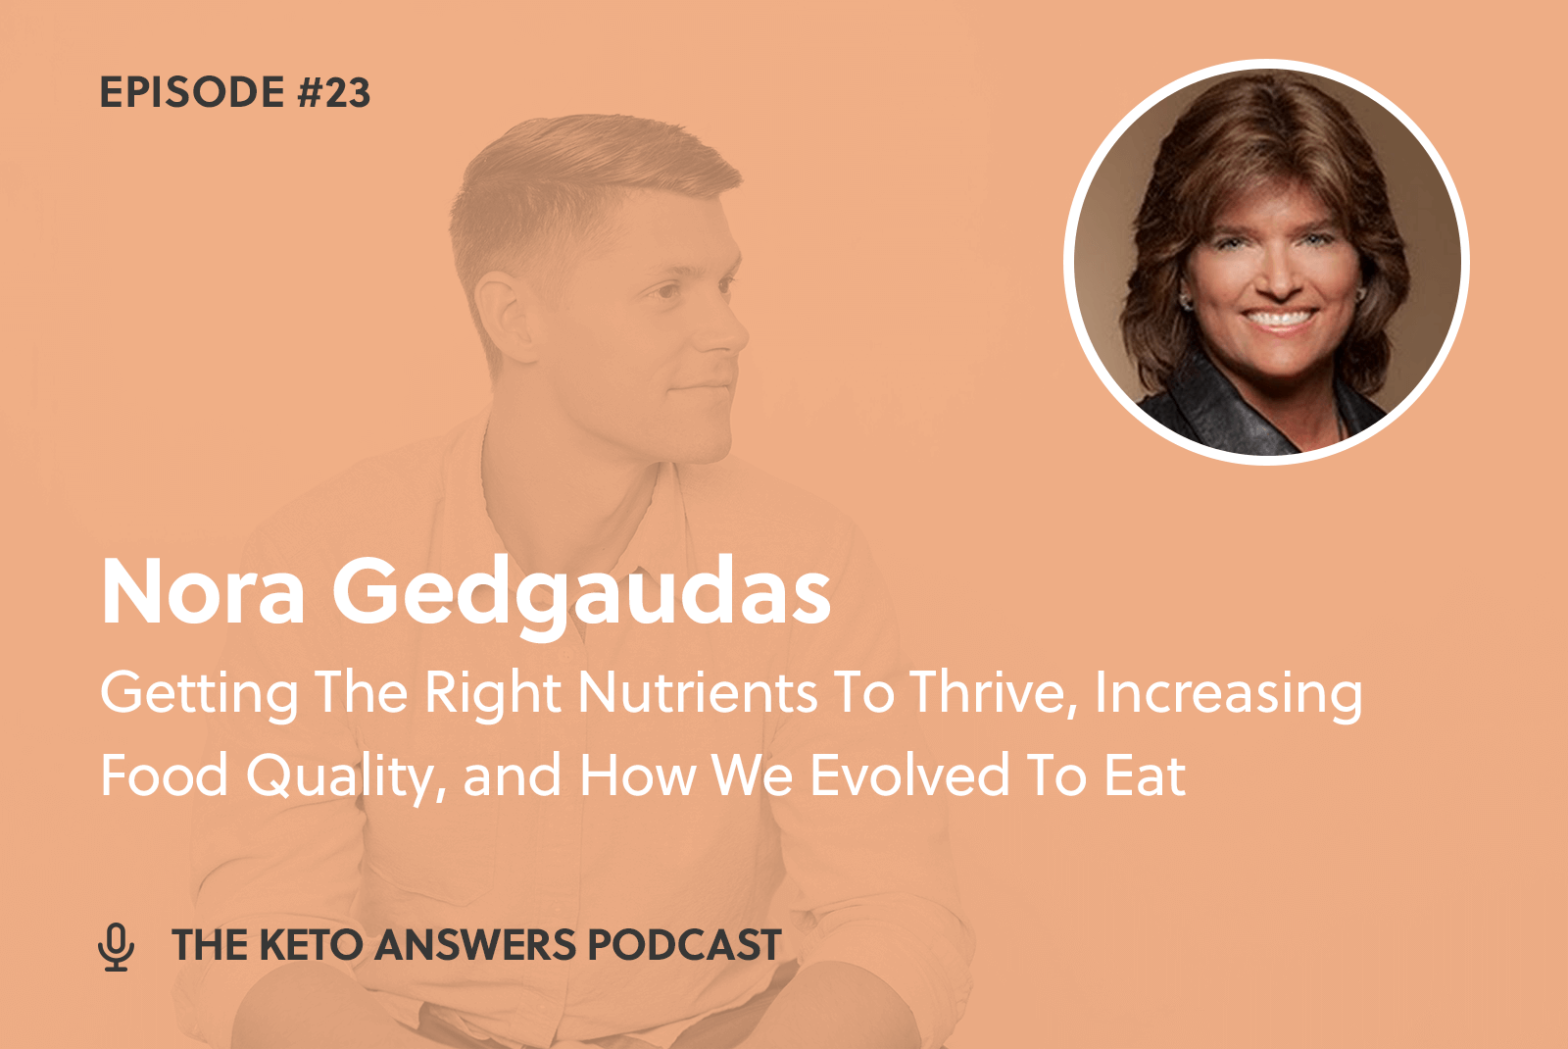 023: Getting The Right Nutrients To Thrive, Increasing Food Quality, and How We Evolved To Eat - Nora Gedgaudas